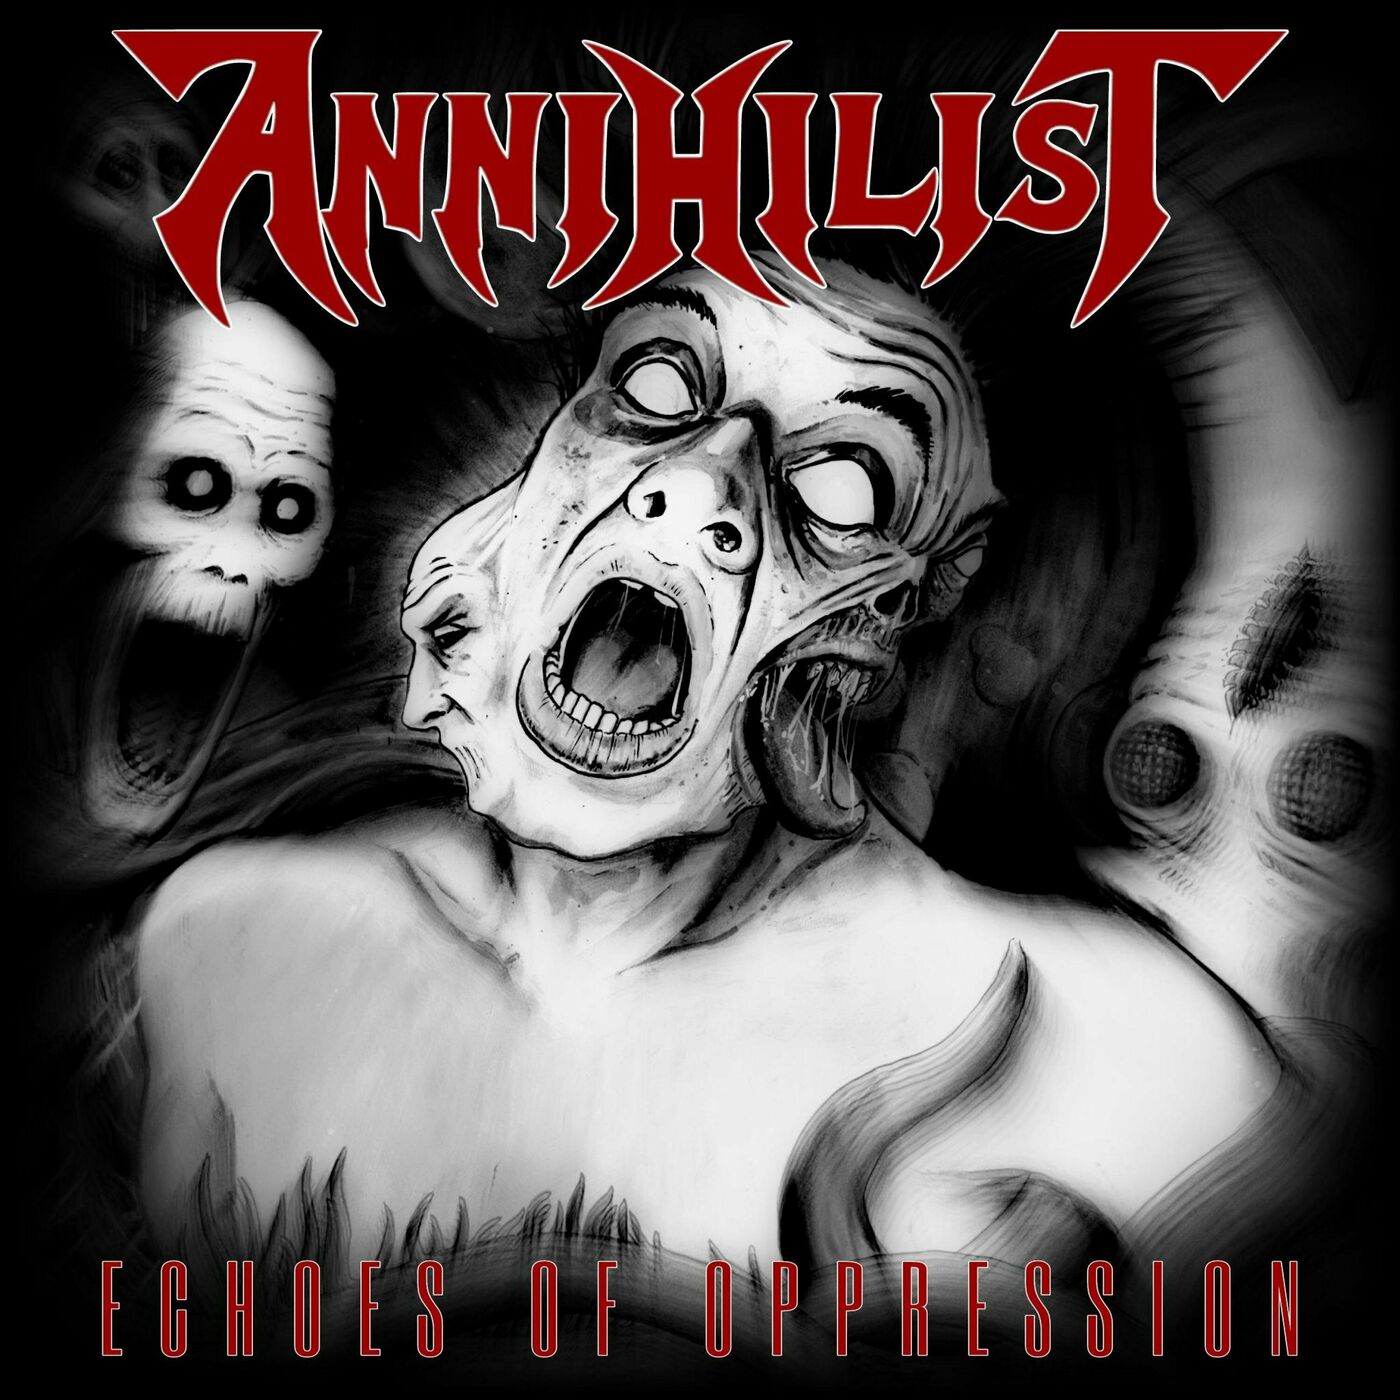 Annihilist - Echoes Of Oppression